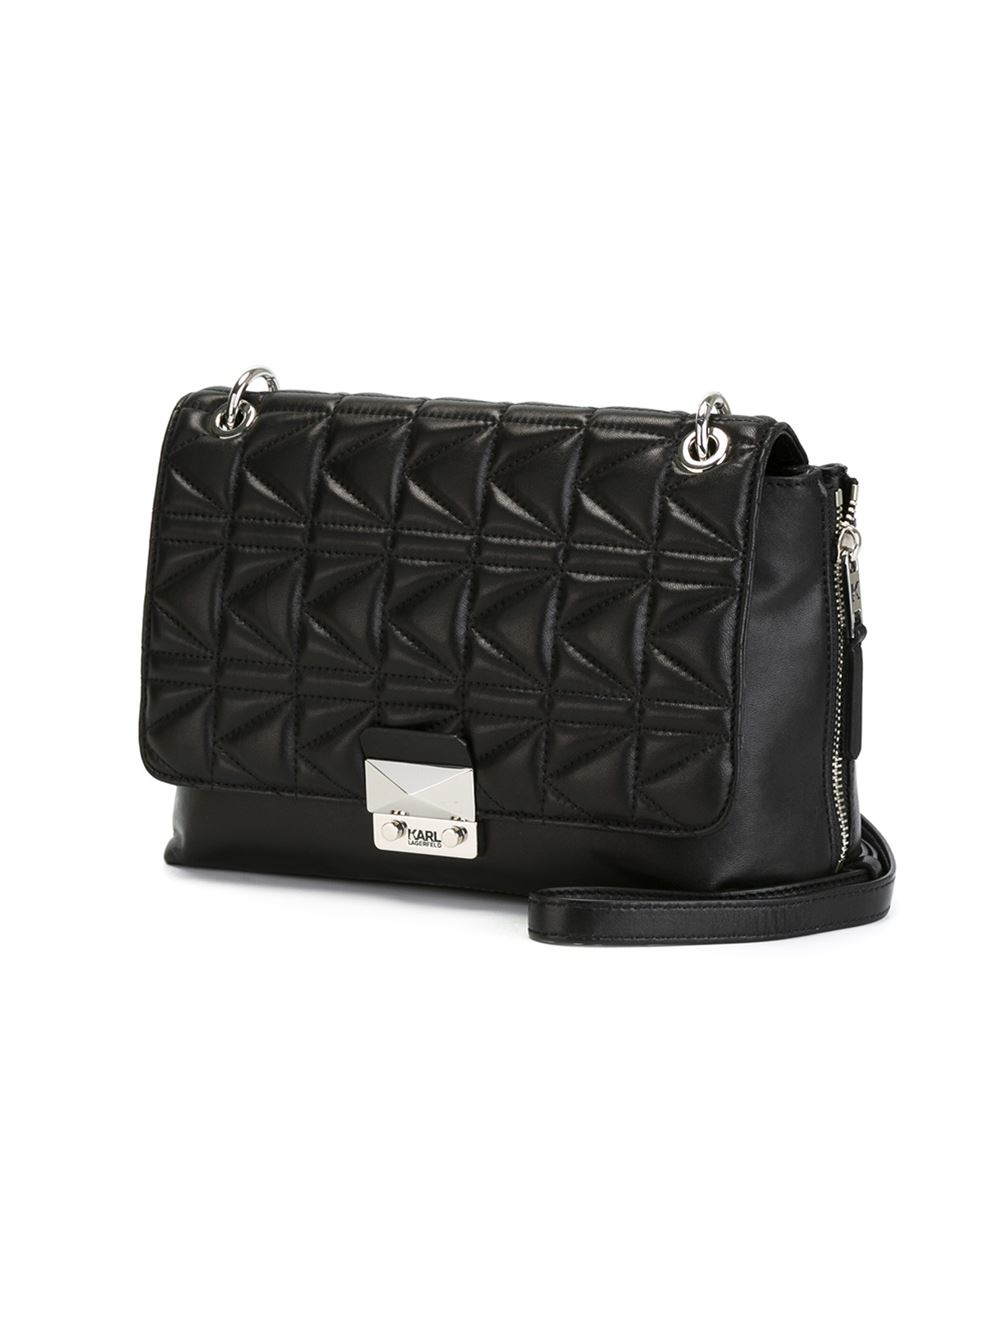 Karl Lagerfeld Large Quilted-Leather Cross-Body Bag in Black - Lyst